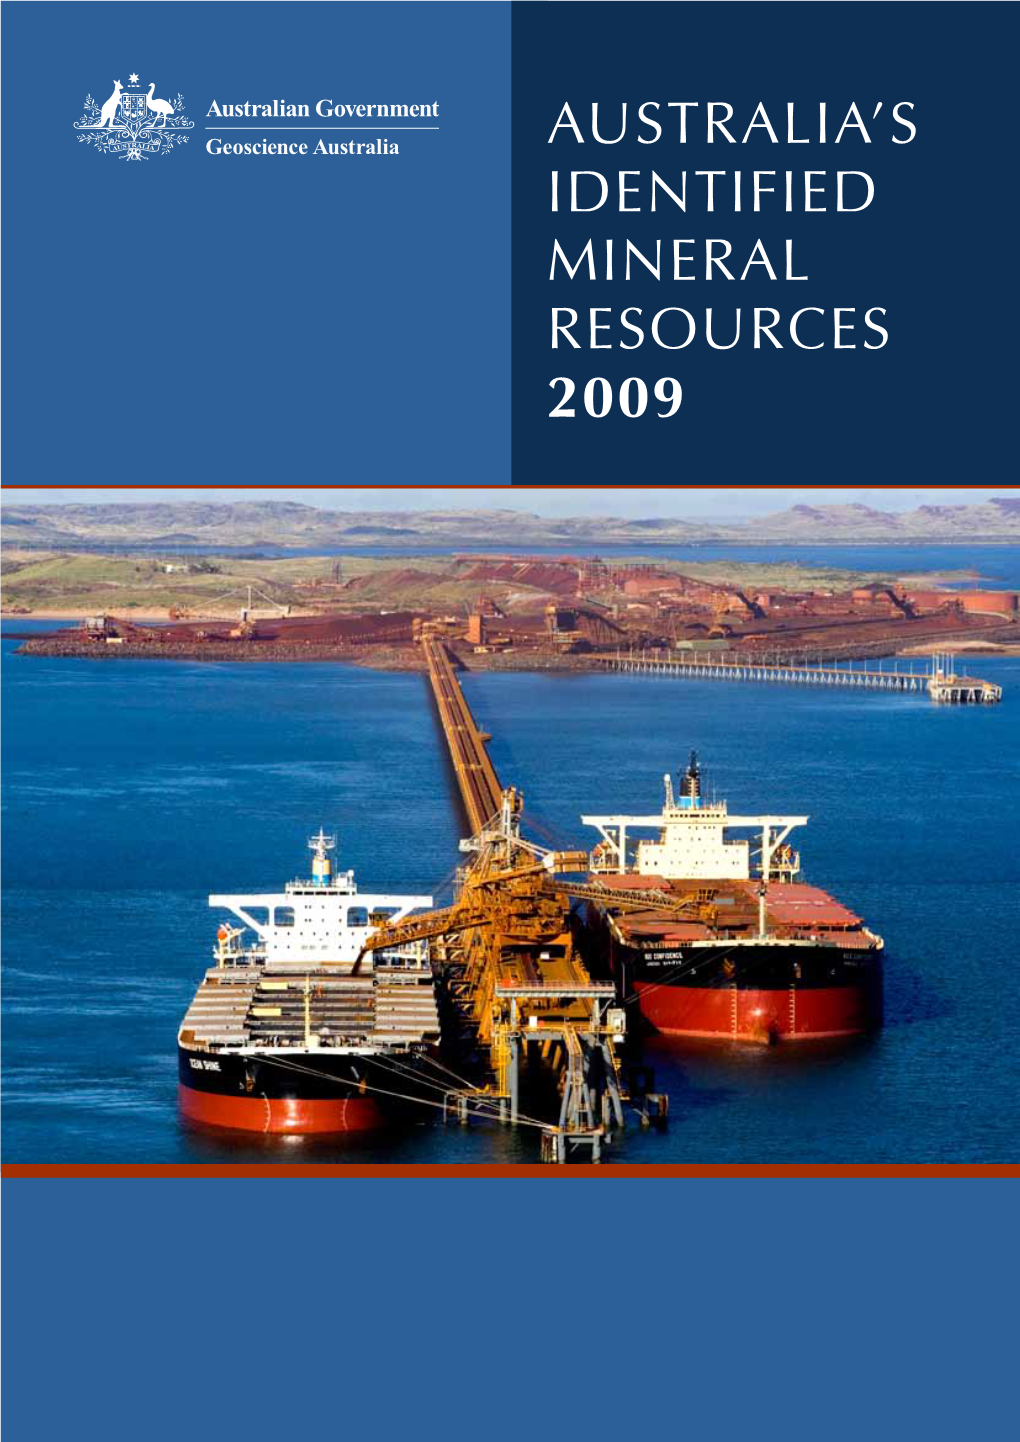 Australia's Idendified Mineral Resources